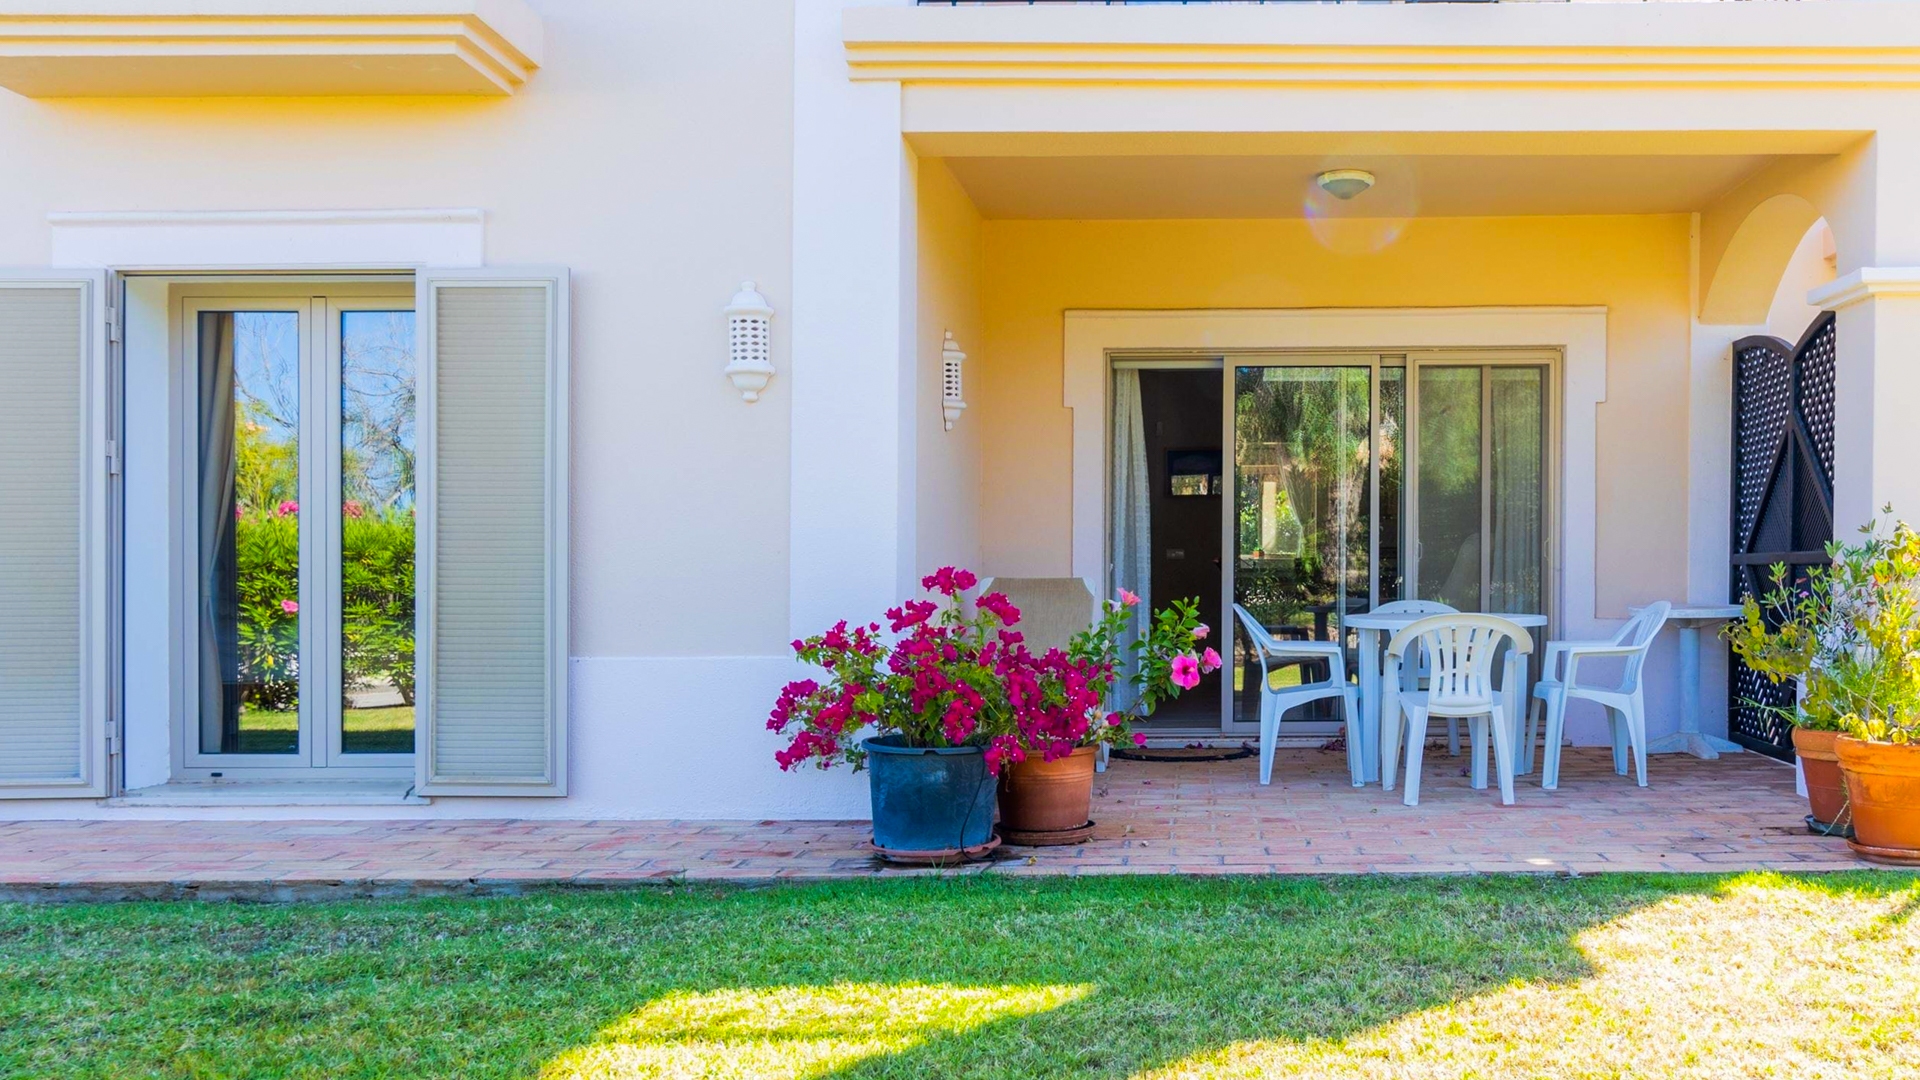 1 Bedroom Ground Floor Apartment with Shared Pool in Very Well Maintained Golf Resort, Carvoeiro | PCG2157 1 bedroom apartment with terrace in well-maintained golf resort with attractive communal facilities and communal pool, close to Carvoeiro.